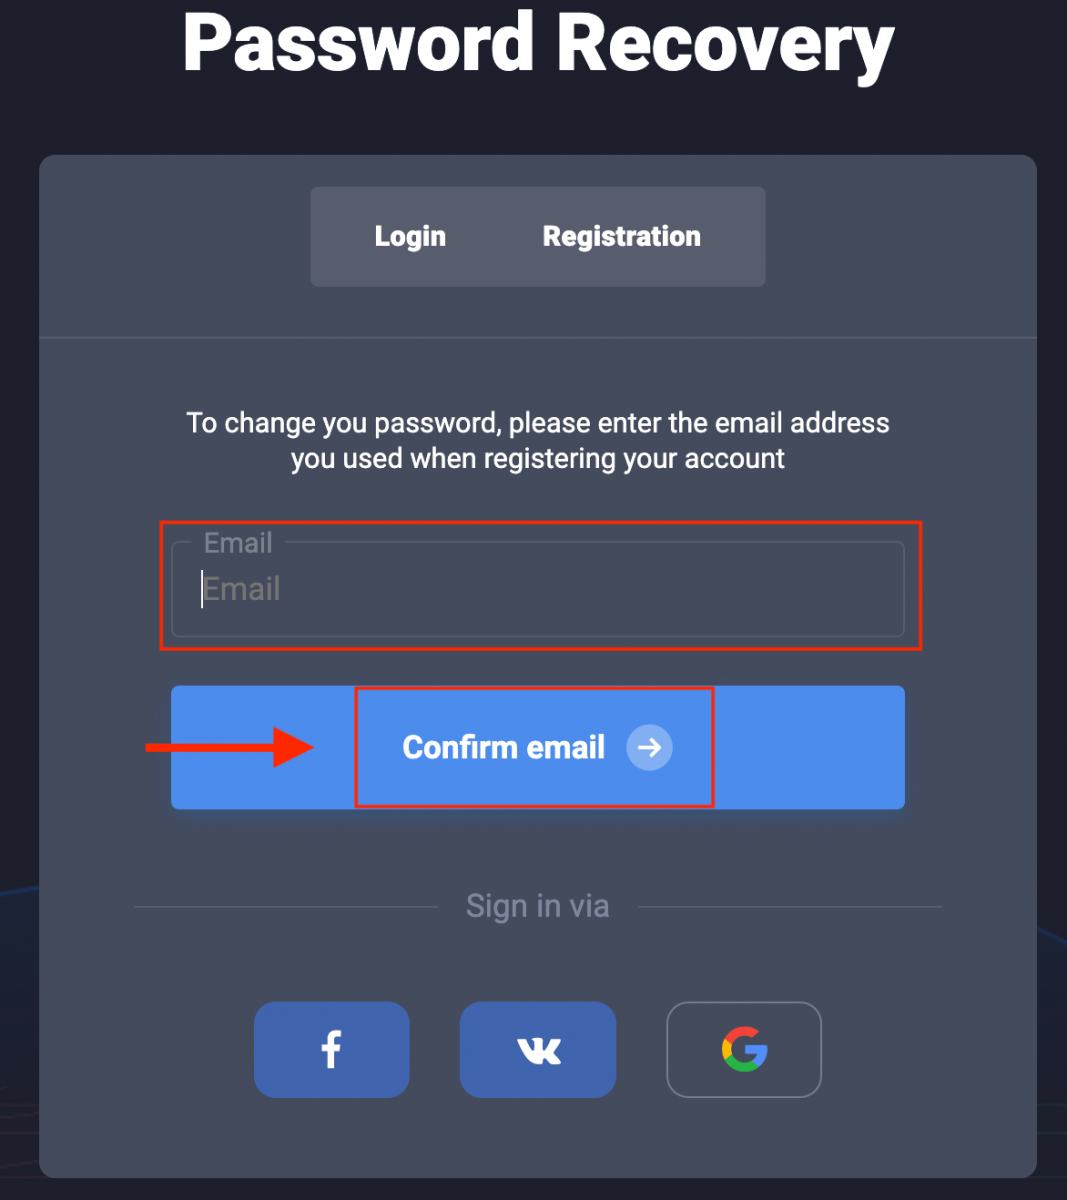 How to Login and Deposit Money in Quotex